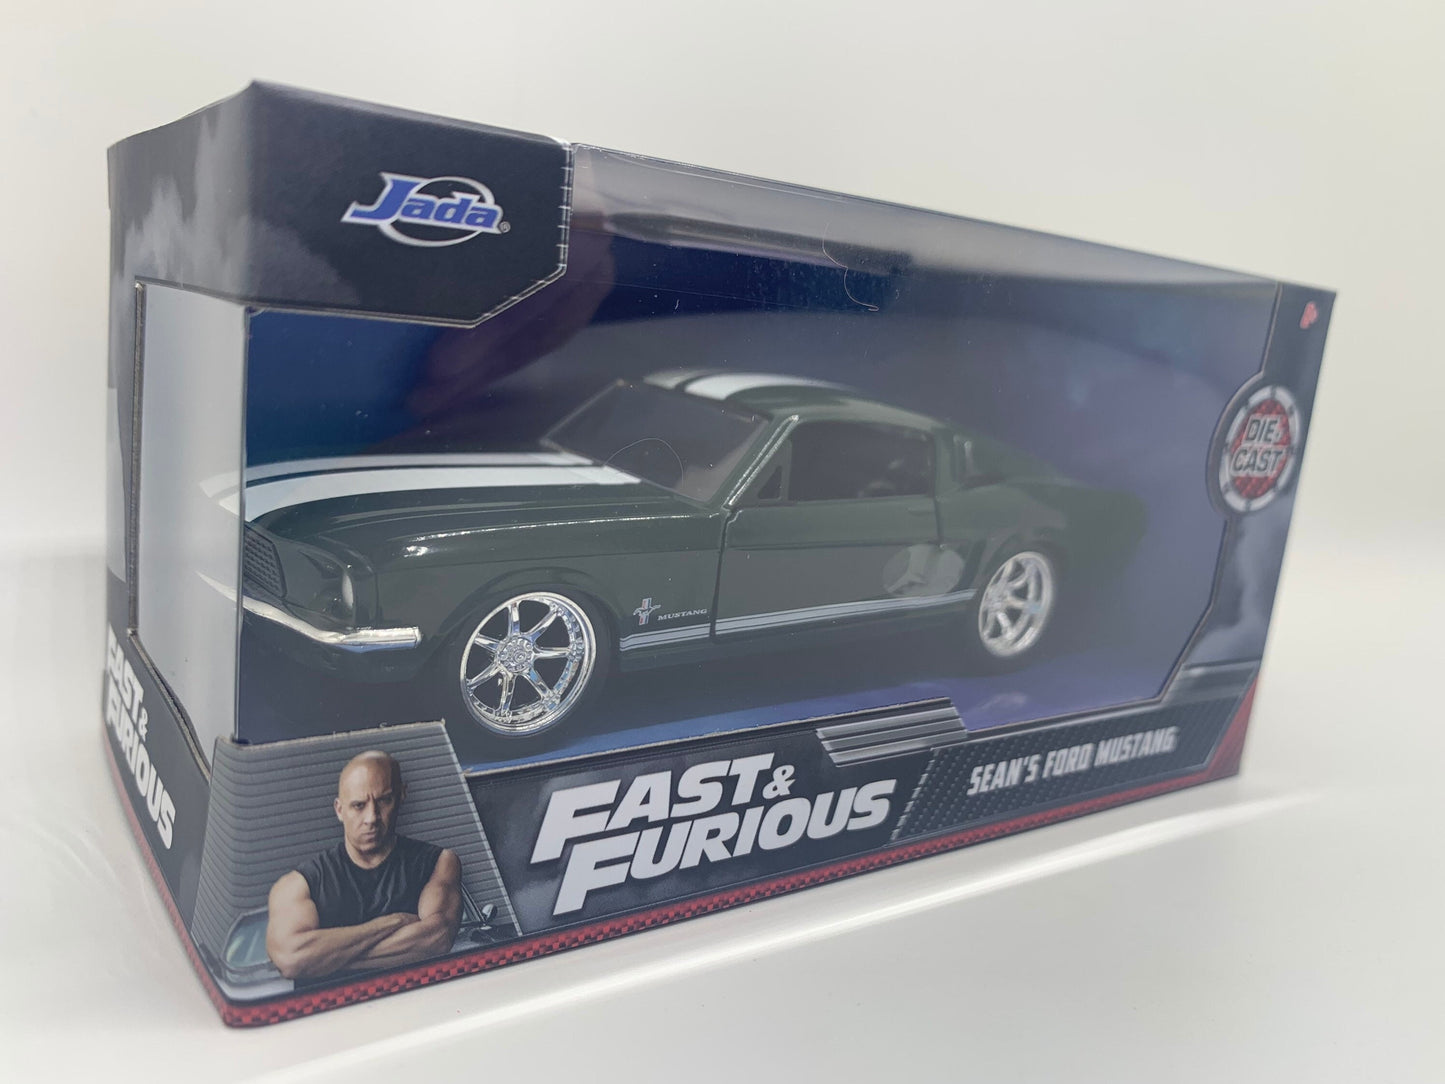 Sean’s Ford Mustang Green and White Diecast 1/43 Scale Model Toy Car JadaToys